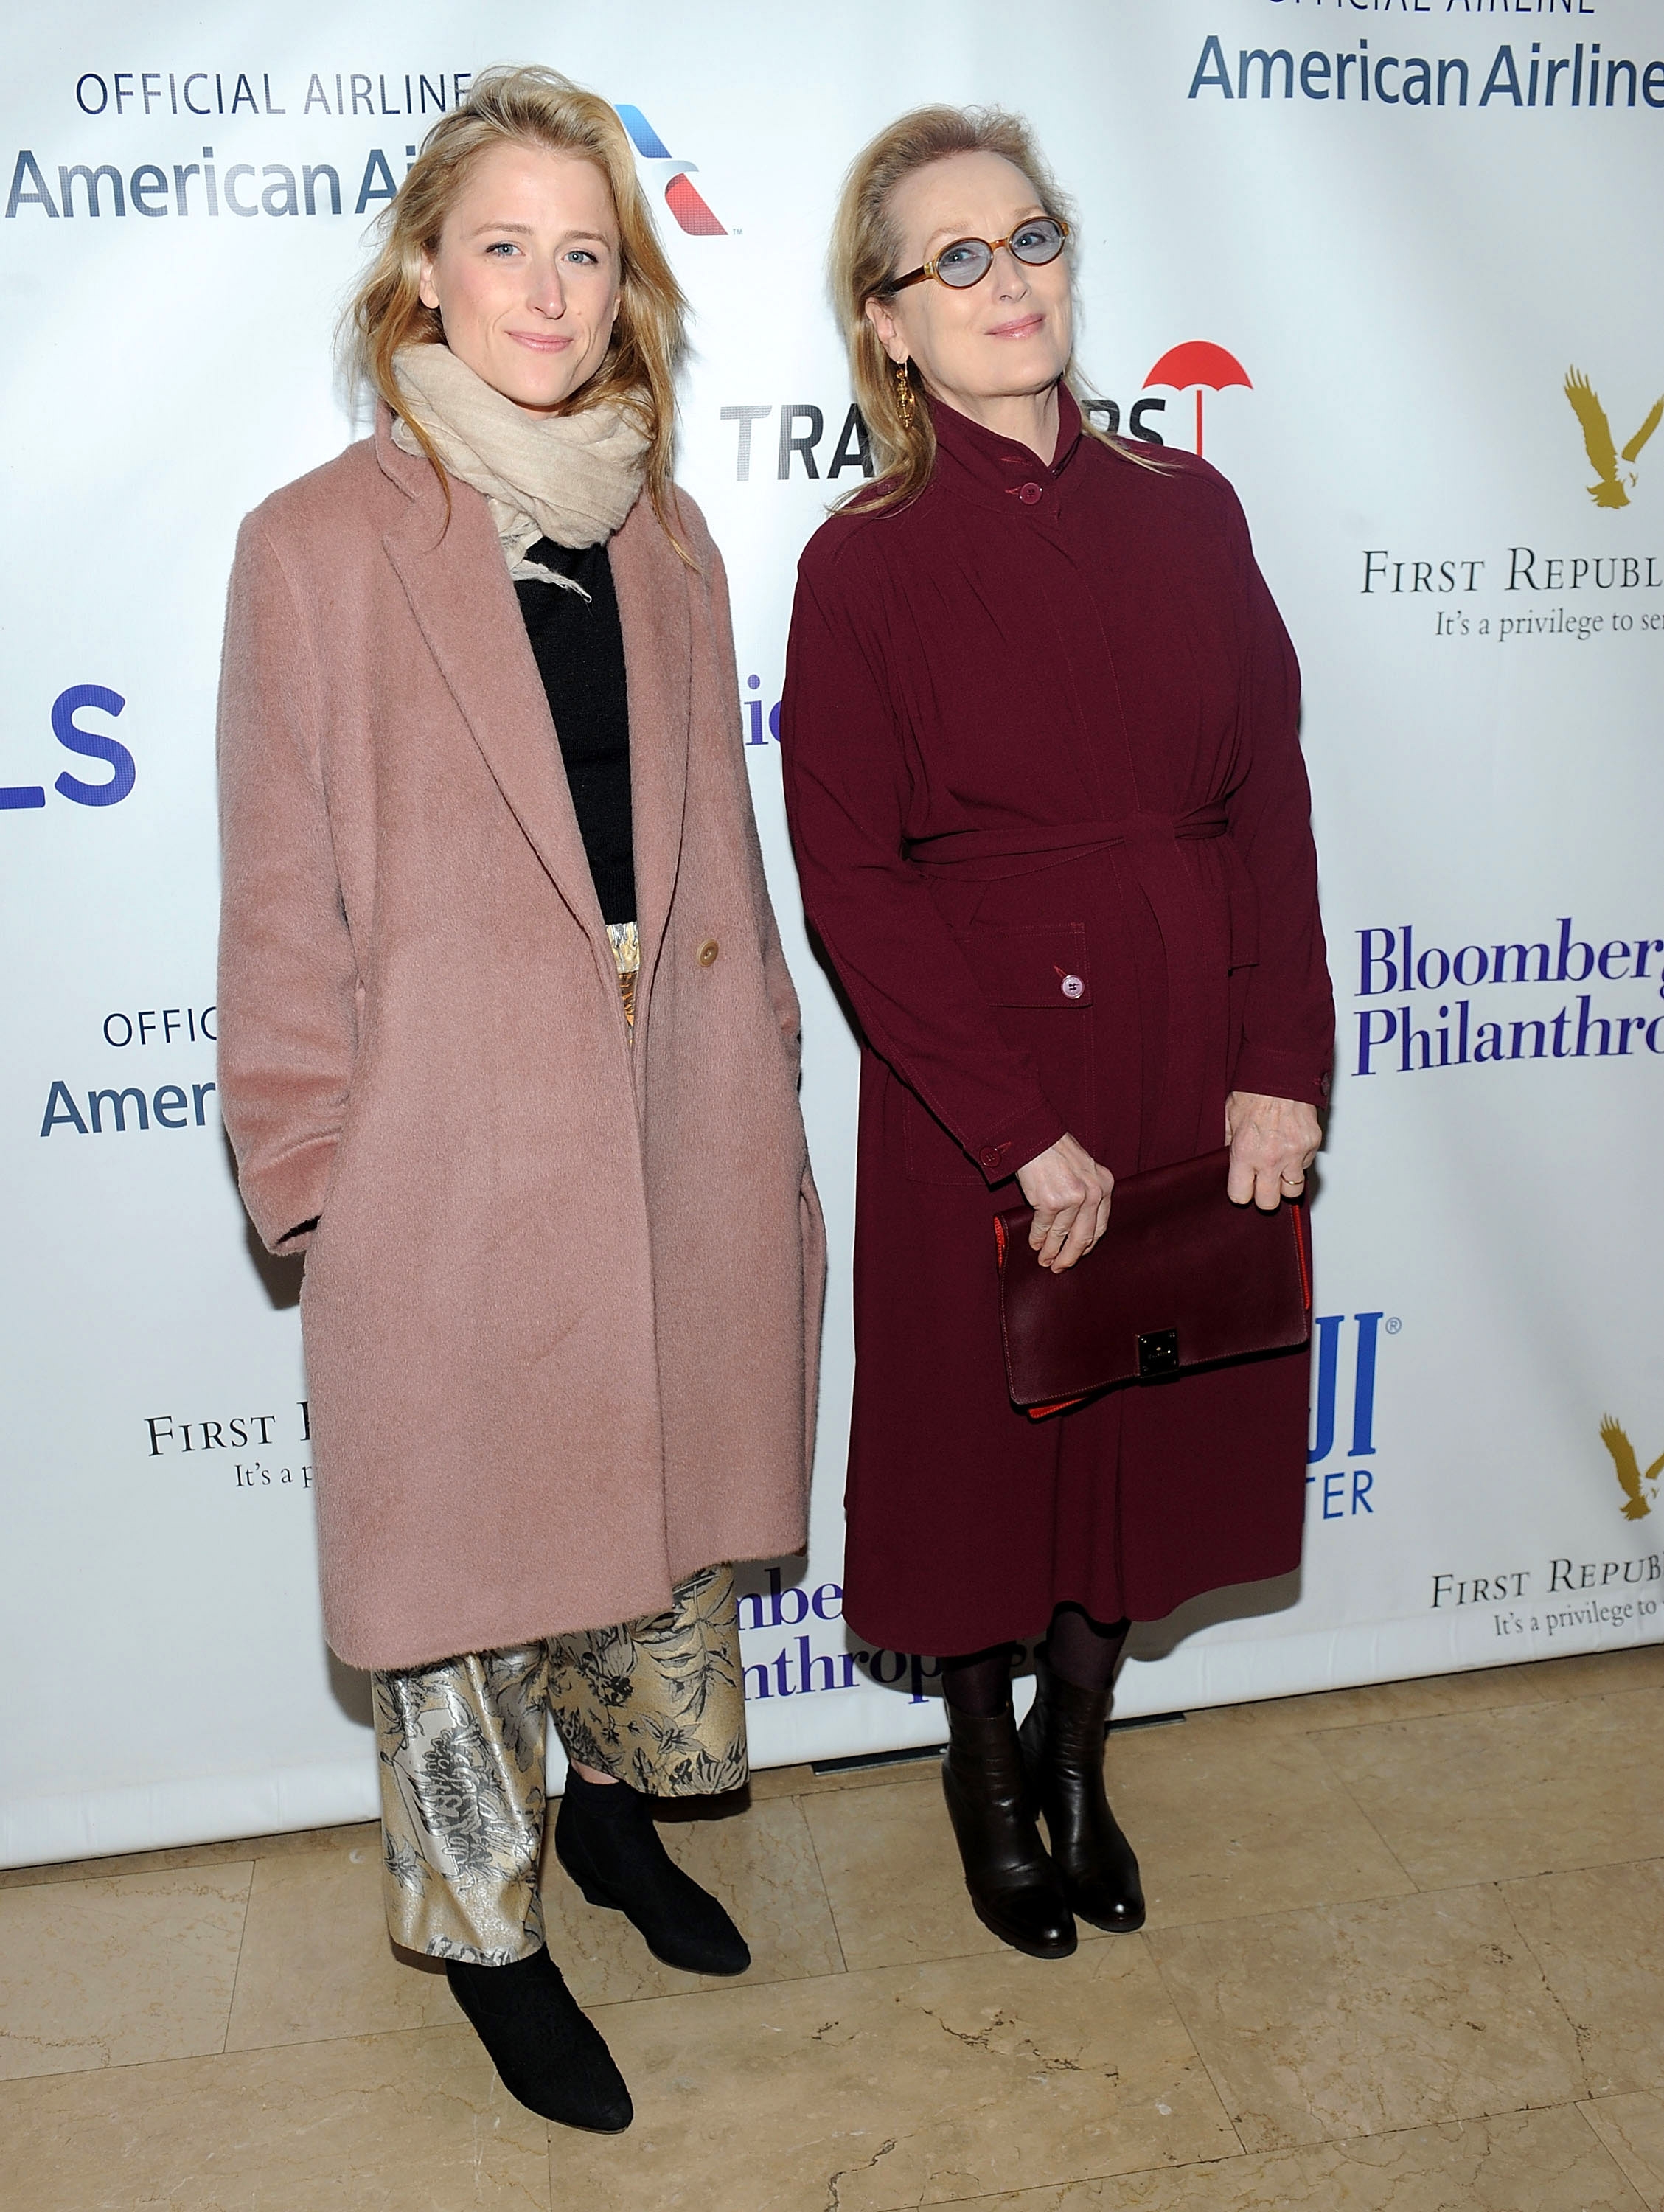 Mamie Gummer(L) and Meryl Streep in New York City on November 20, 2015 | Source: Getty Images